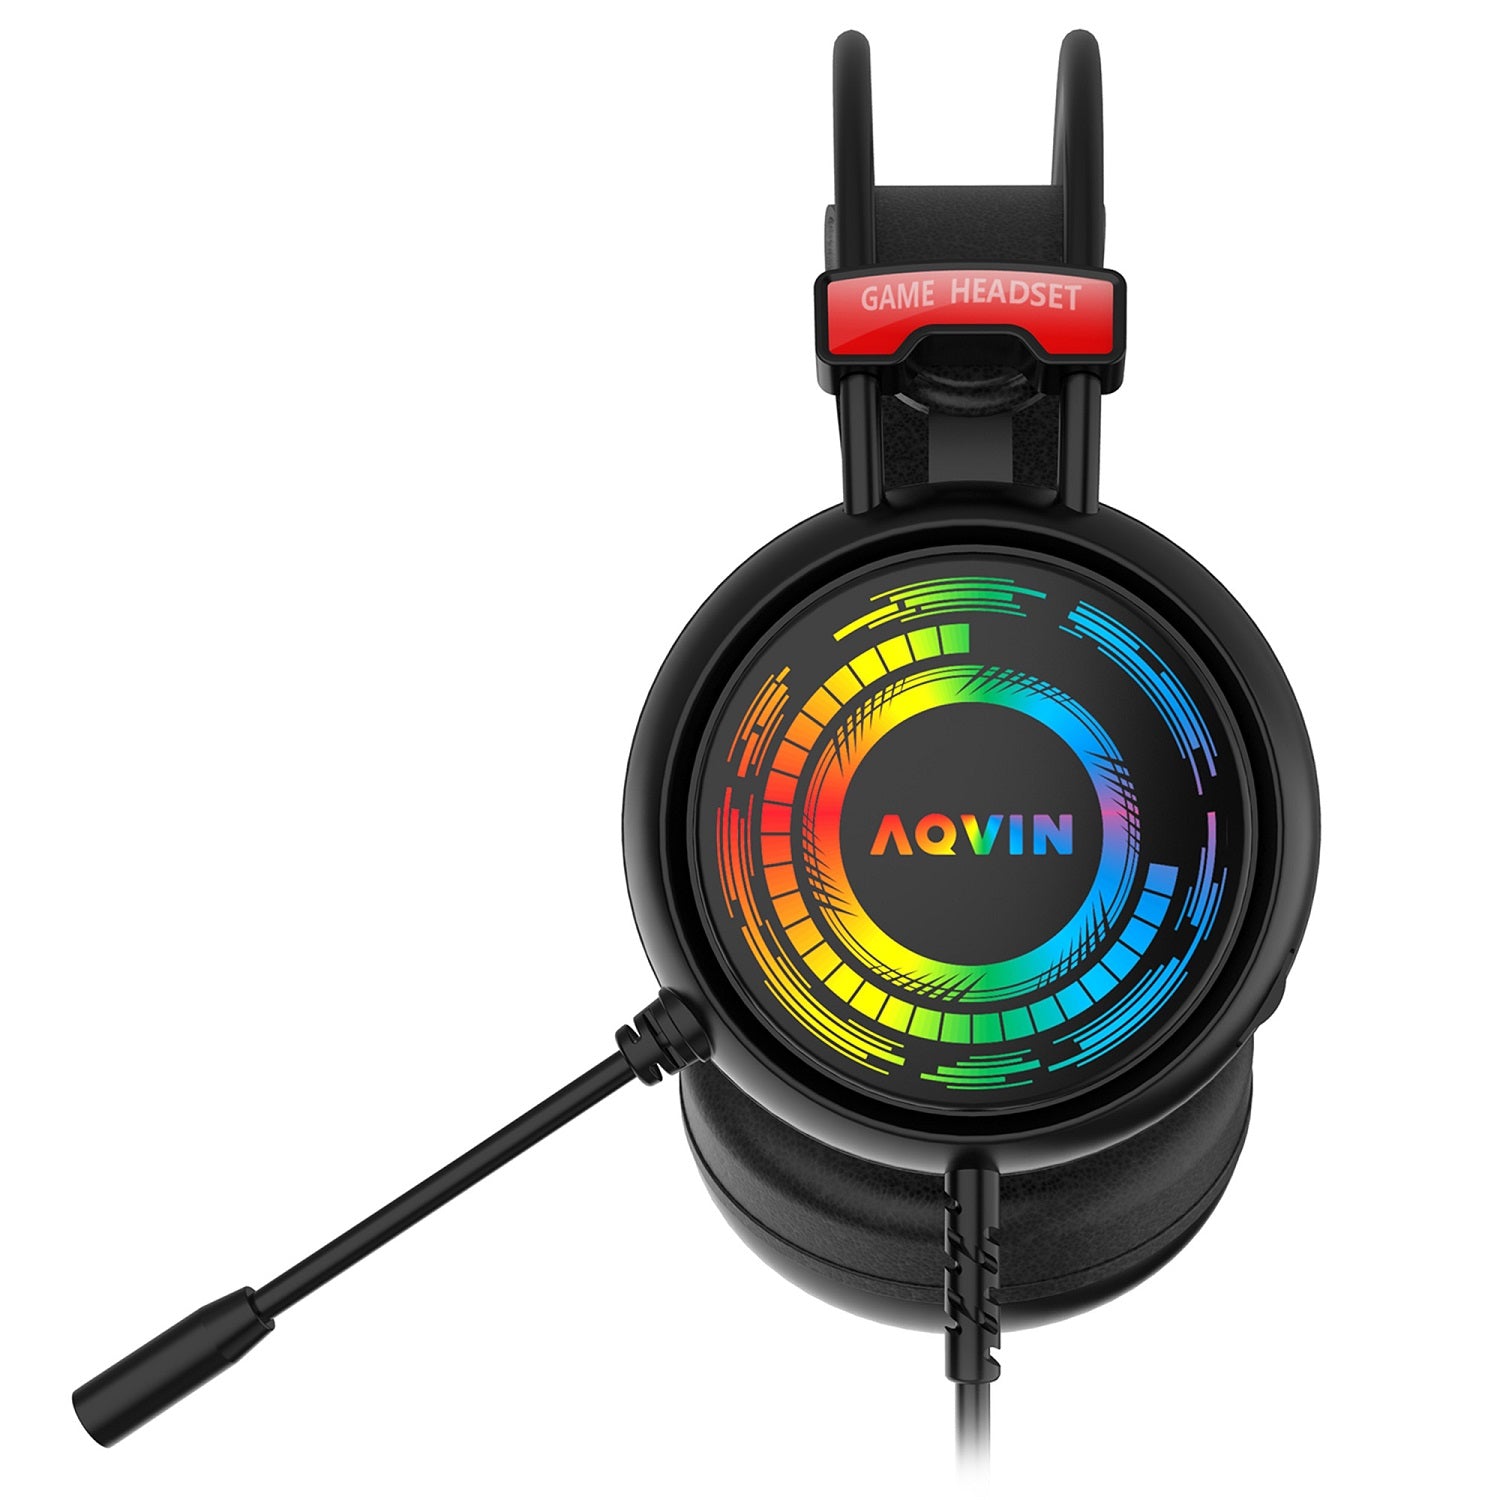 AQVIN Q300 RGB Wired Gaming Headset, RGB Backlight, 7.1 Stereo Surround Sound, 50MM Drivers, Adjustable Microphone, Over-Ear Headphones for PC, Laptop etc - Black